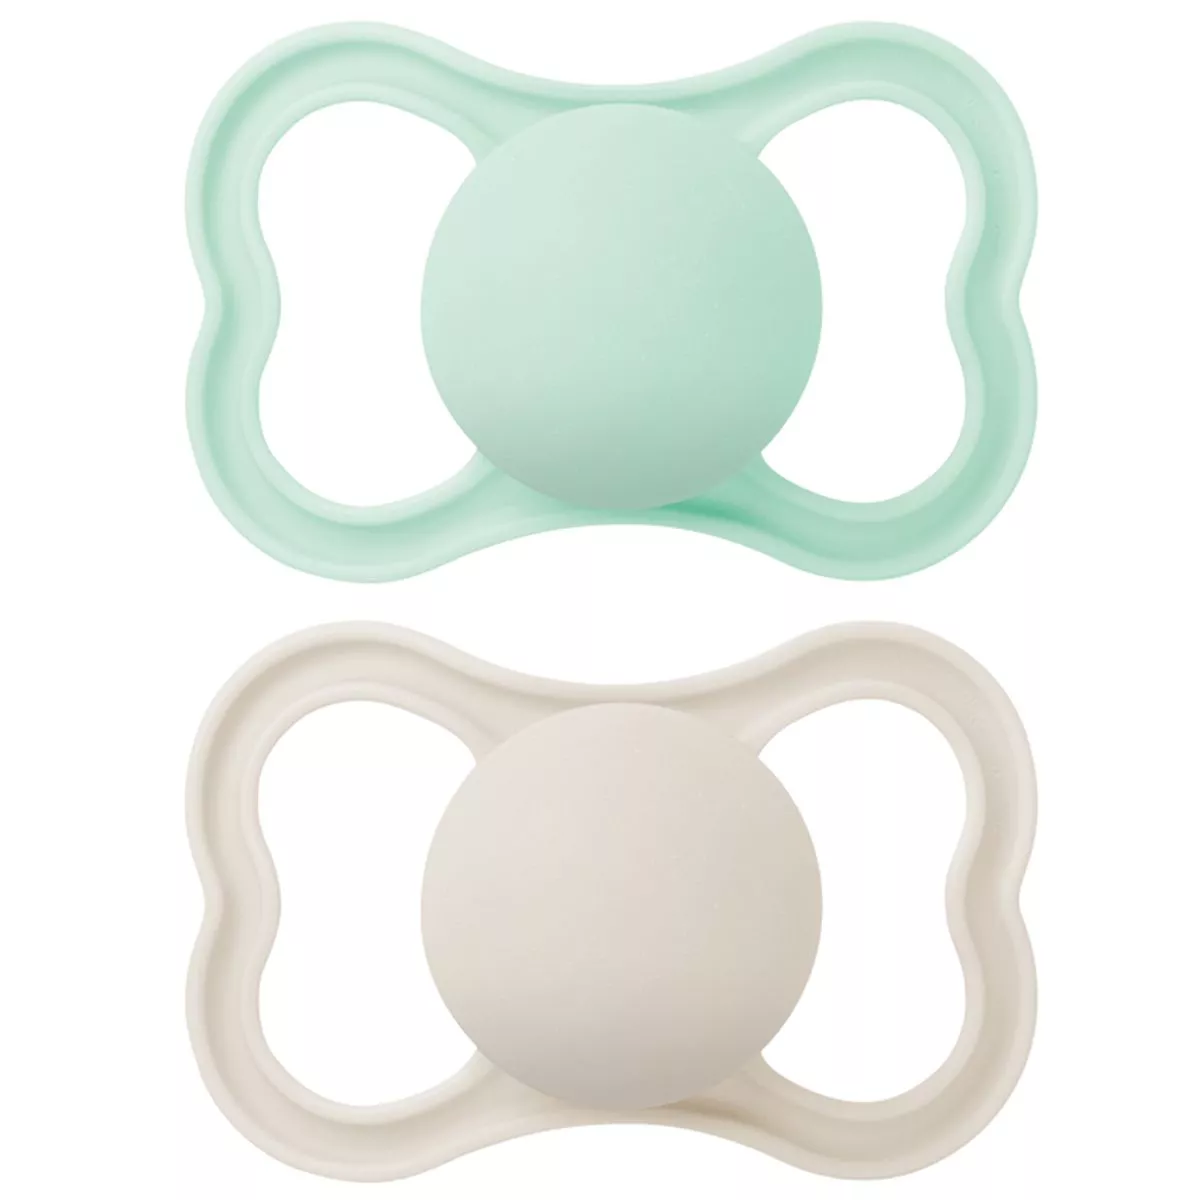 MAM Air Soother1 6+ months, set of 2